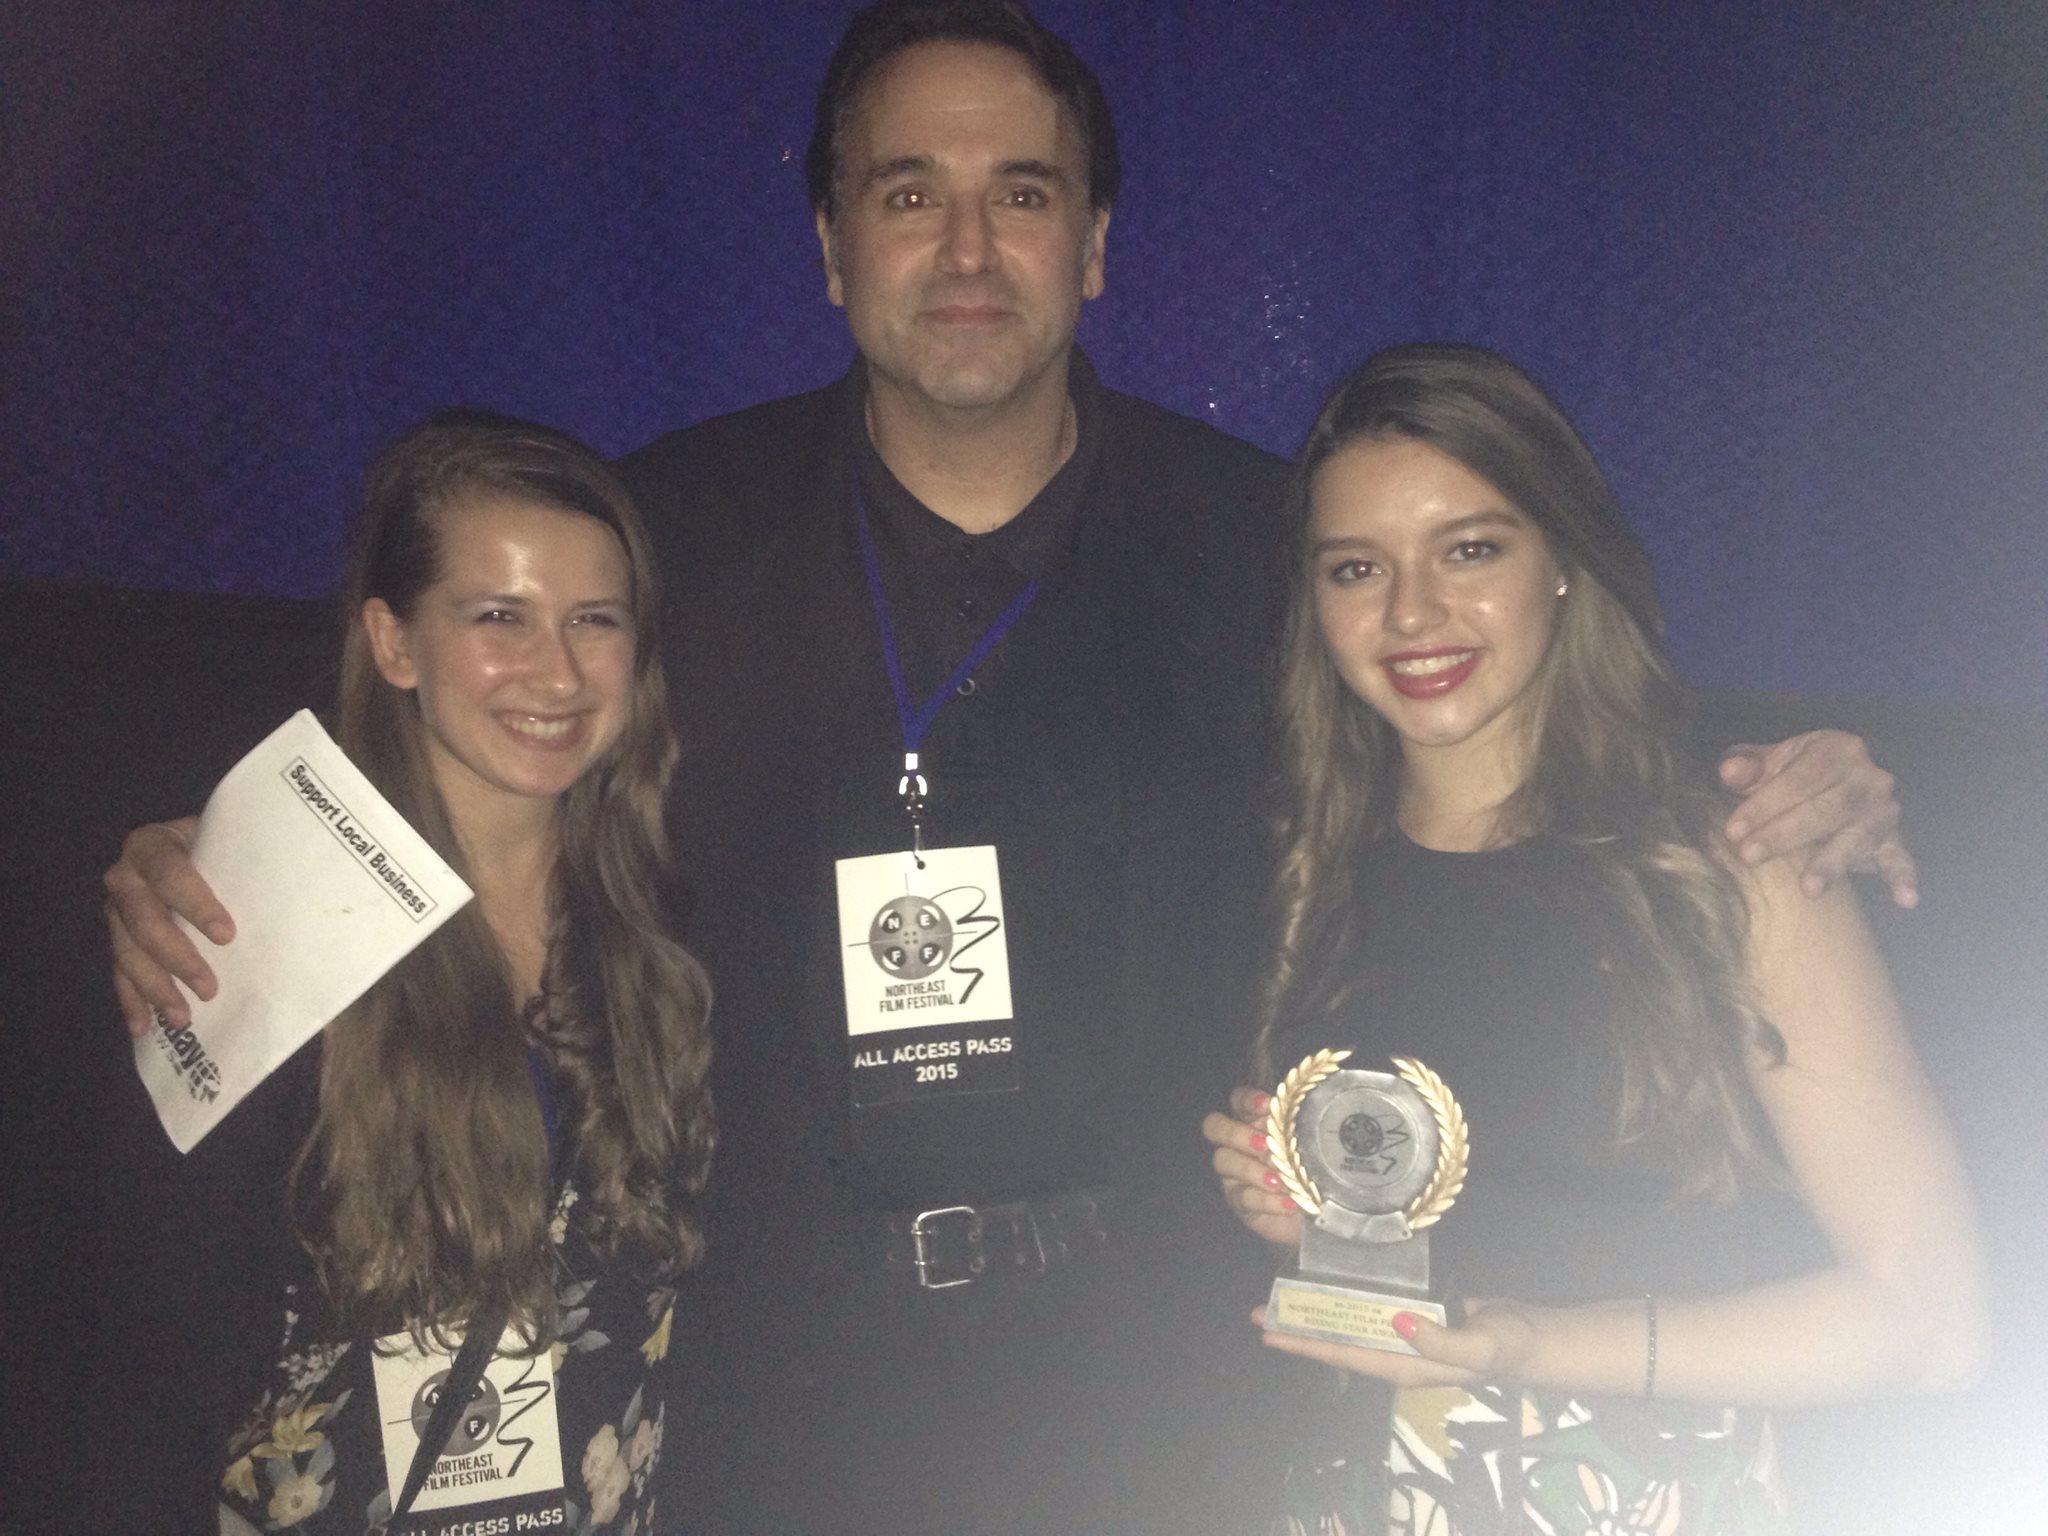 With director/producer/writer Sam Borowski and actress Fatima Ptacek, at the Northeast Film Festival (2015).